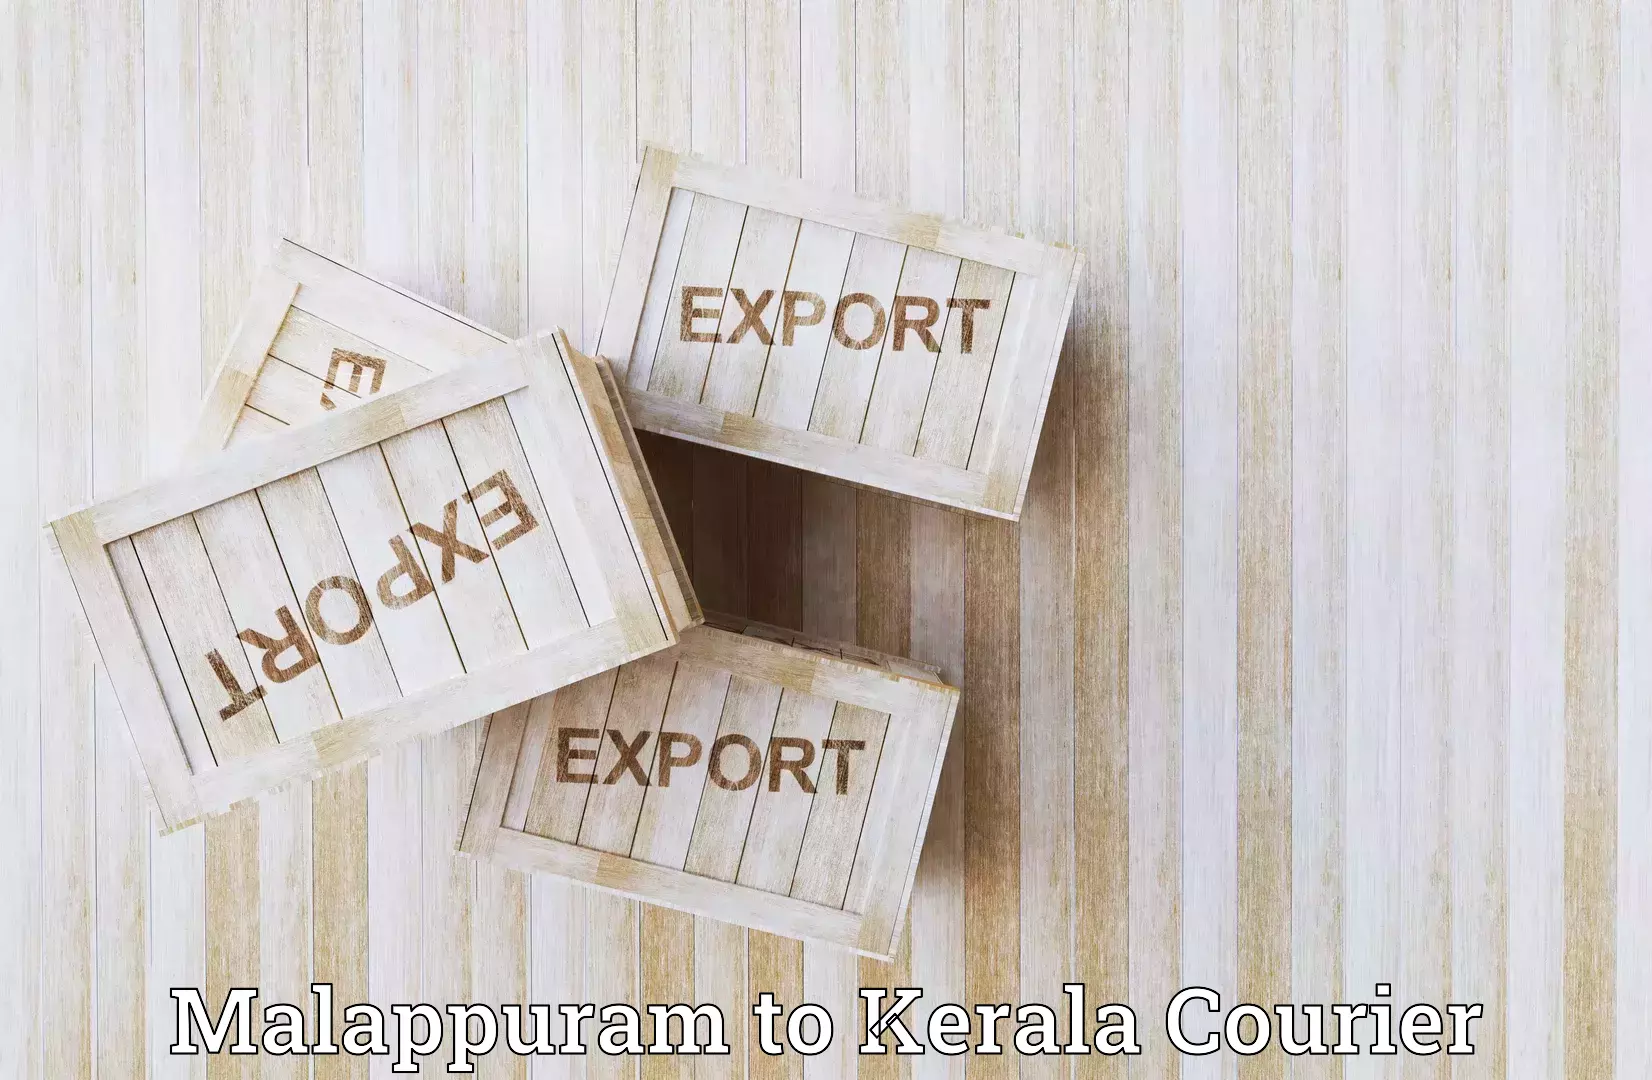 Express delivery network Malappuram to Kerala